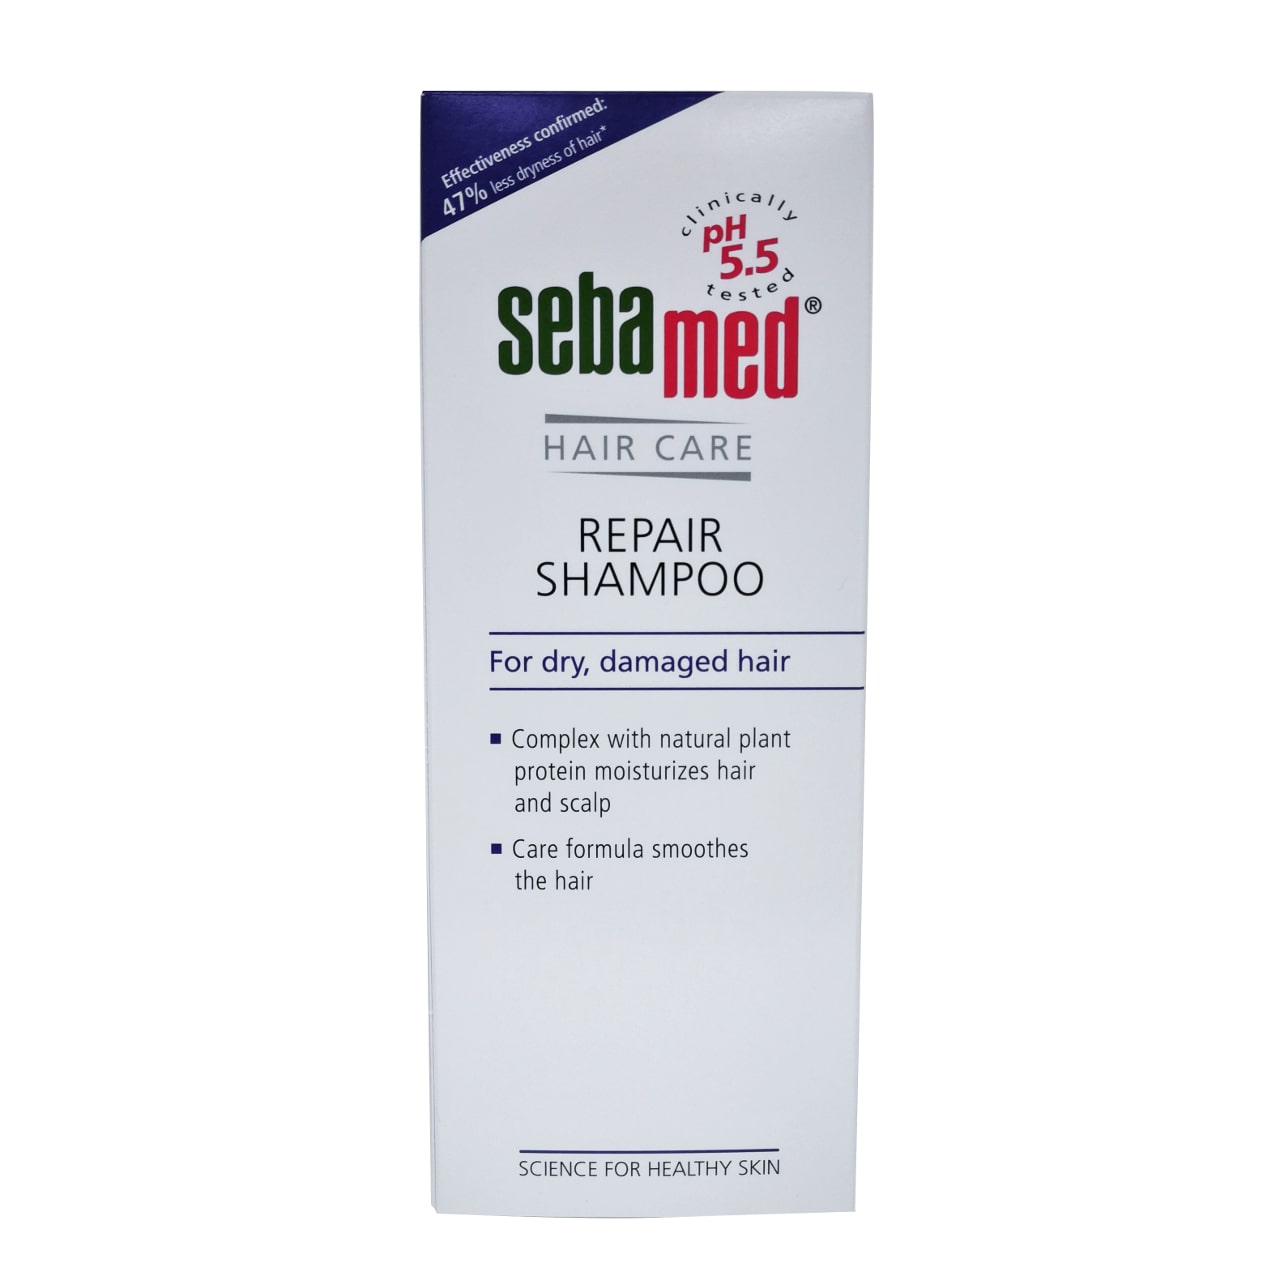 Product label for Sebamed Hair Care Repair Shampoo in English